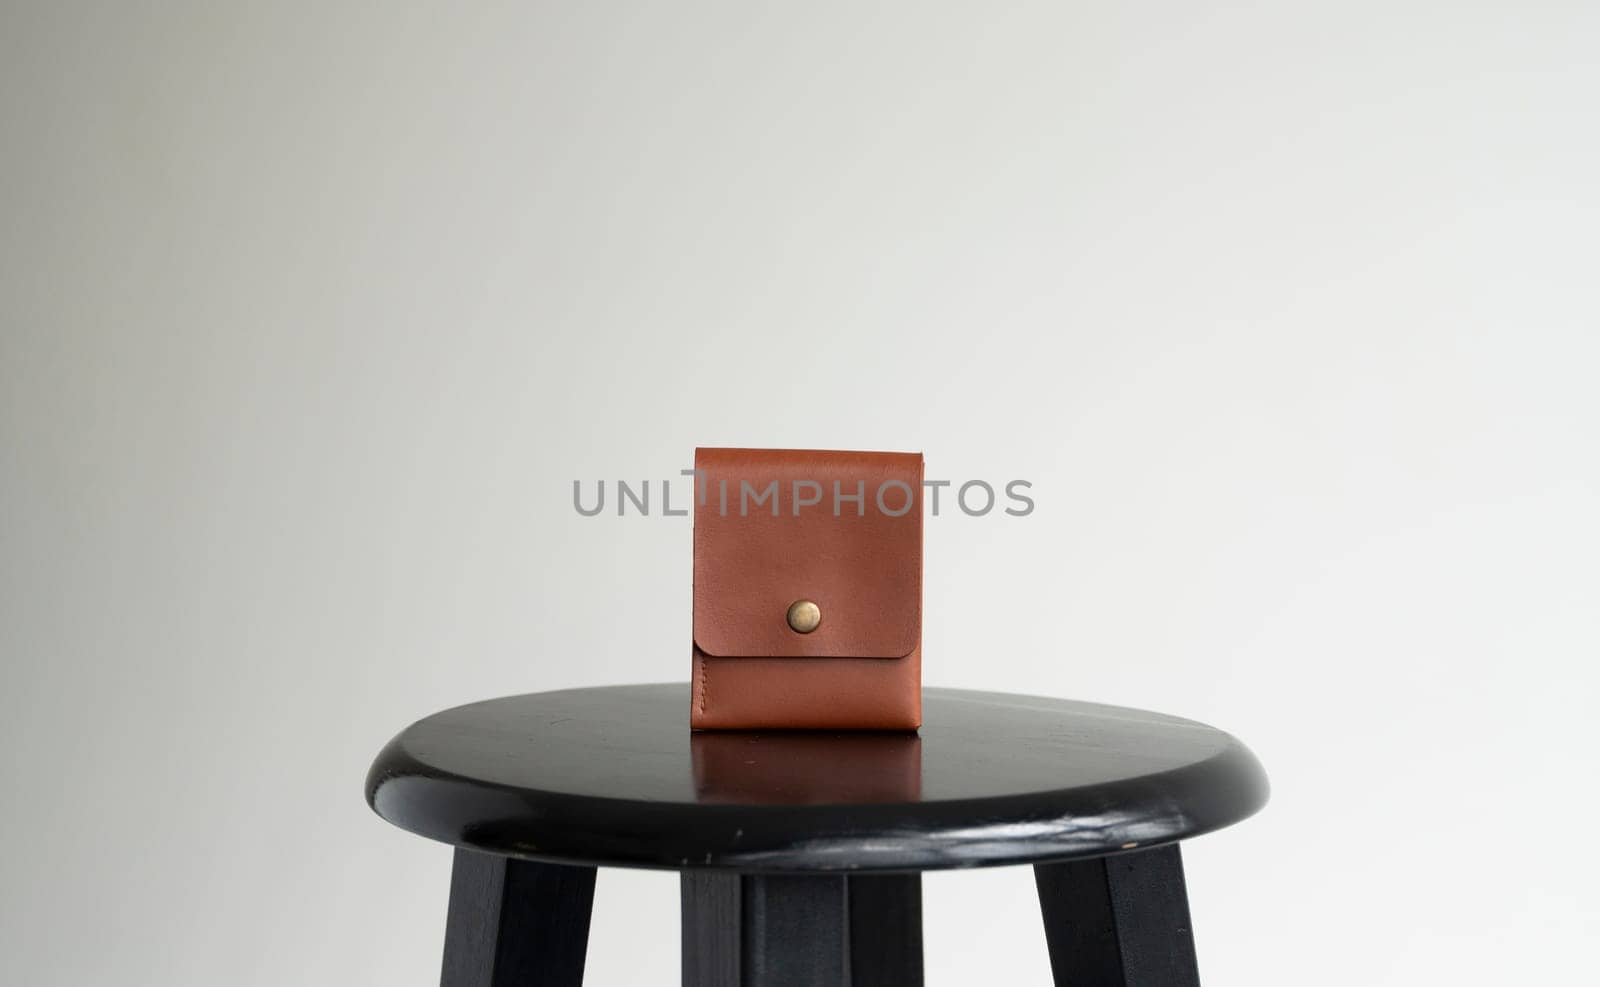 Orange men's business leather card holder on a black chair with a white background. Men's accessories